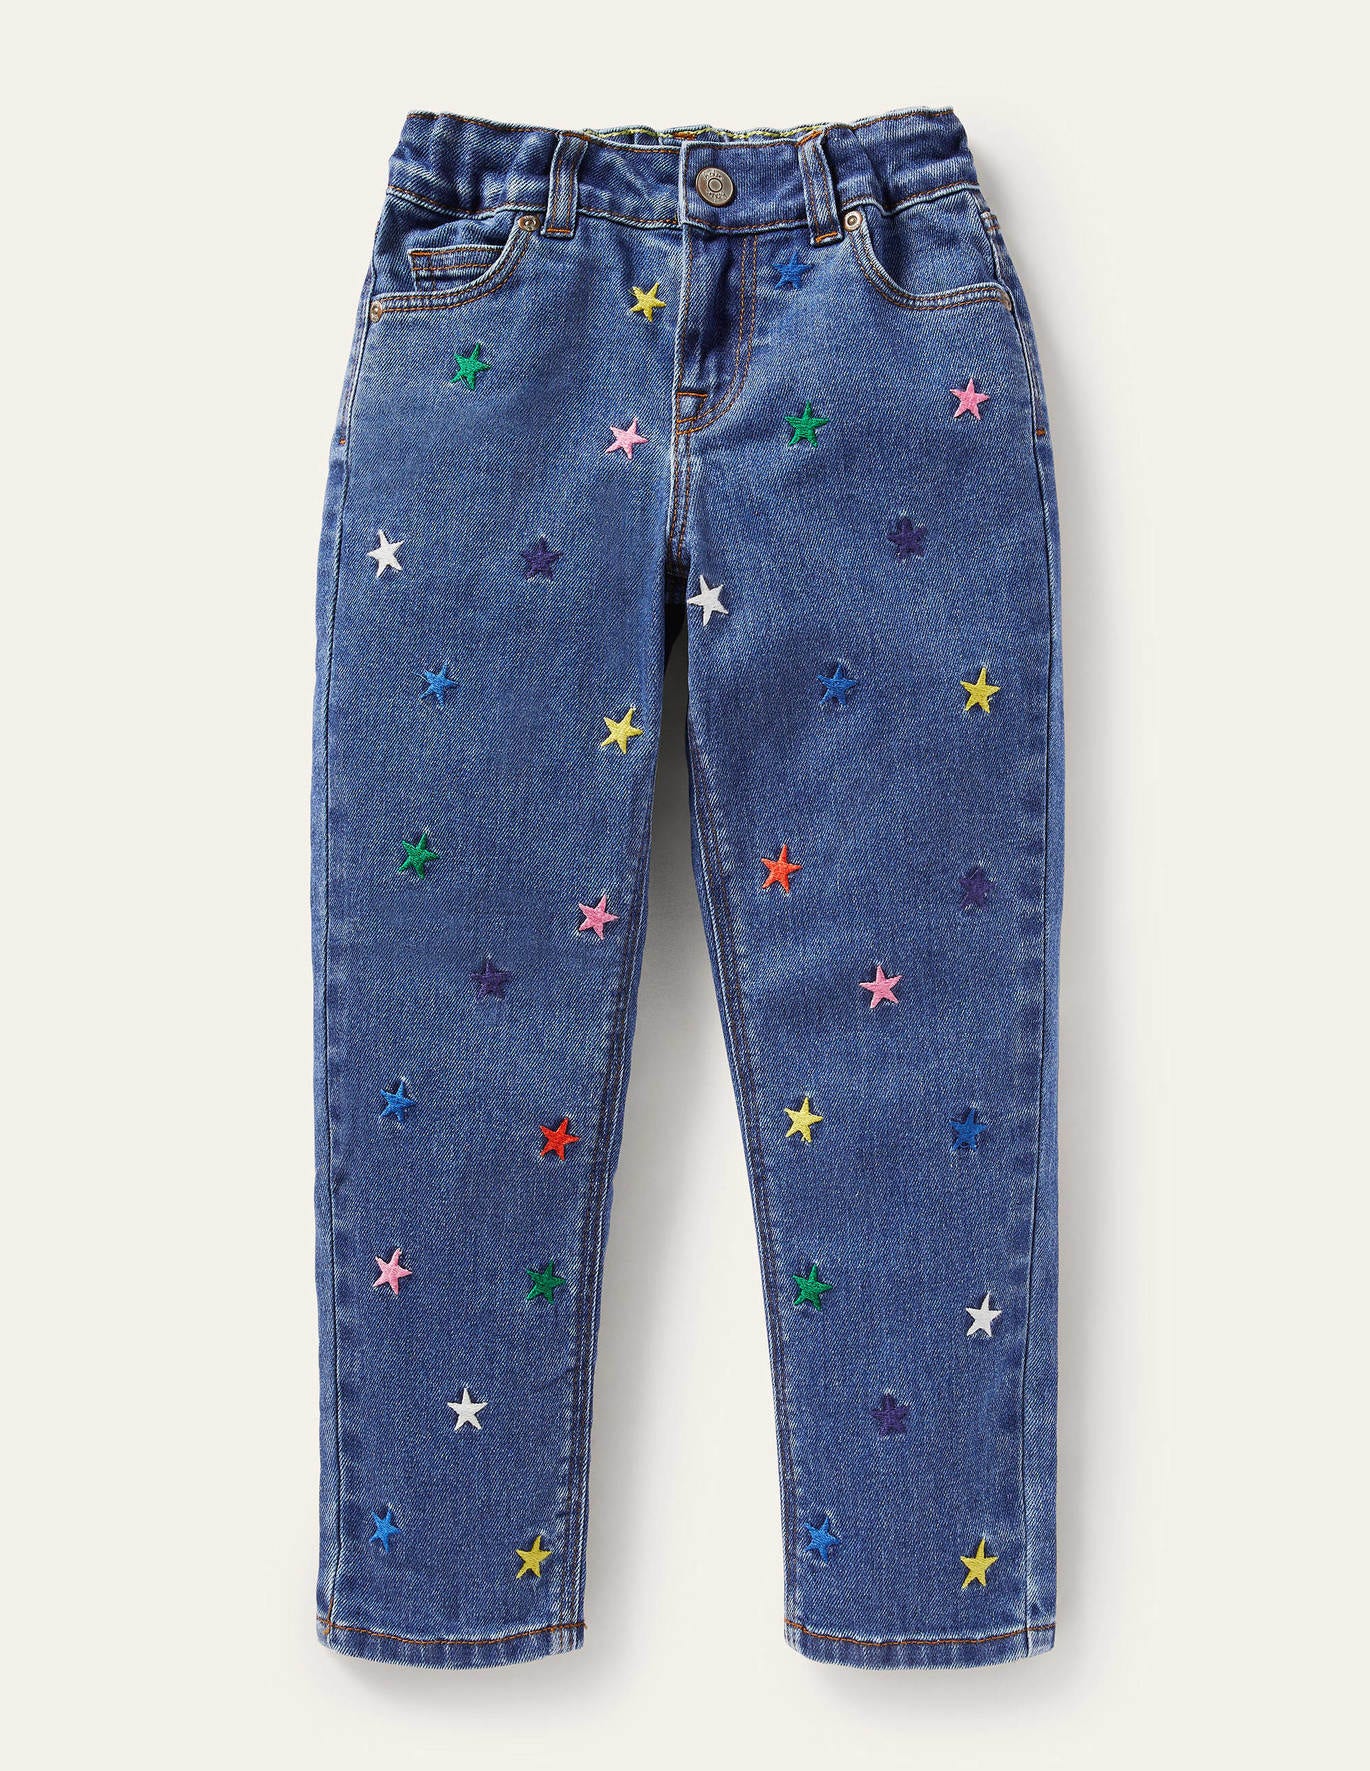 Boden Girlfriend Jeans - Mid Vintage Embroidered Stars